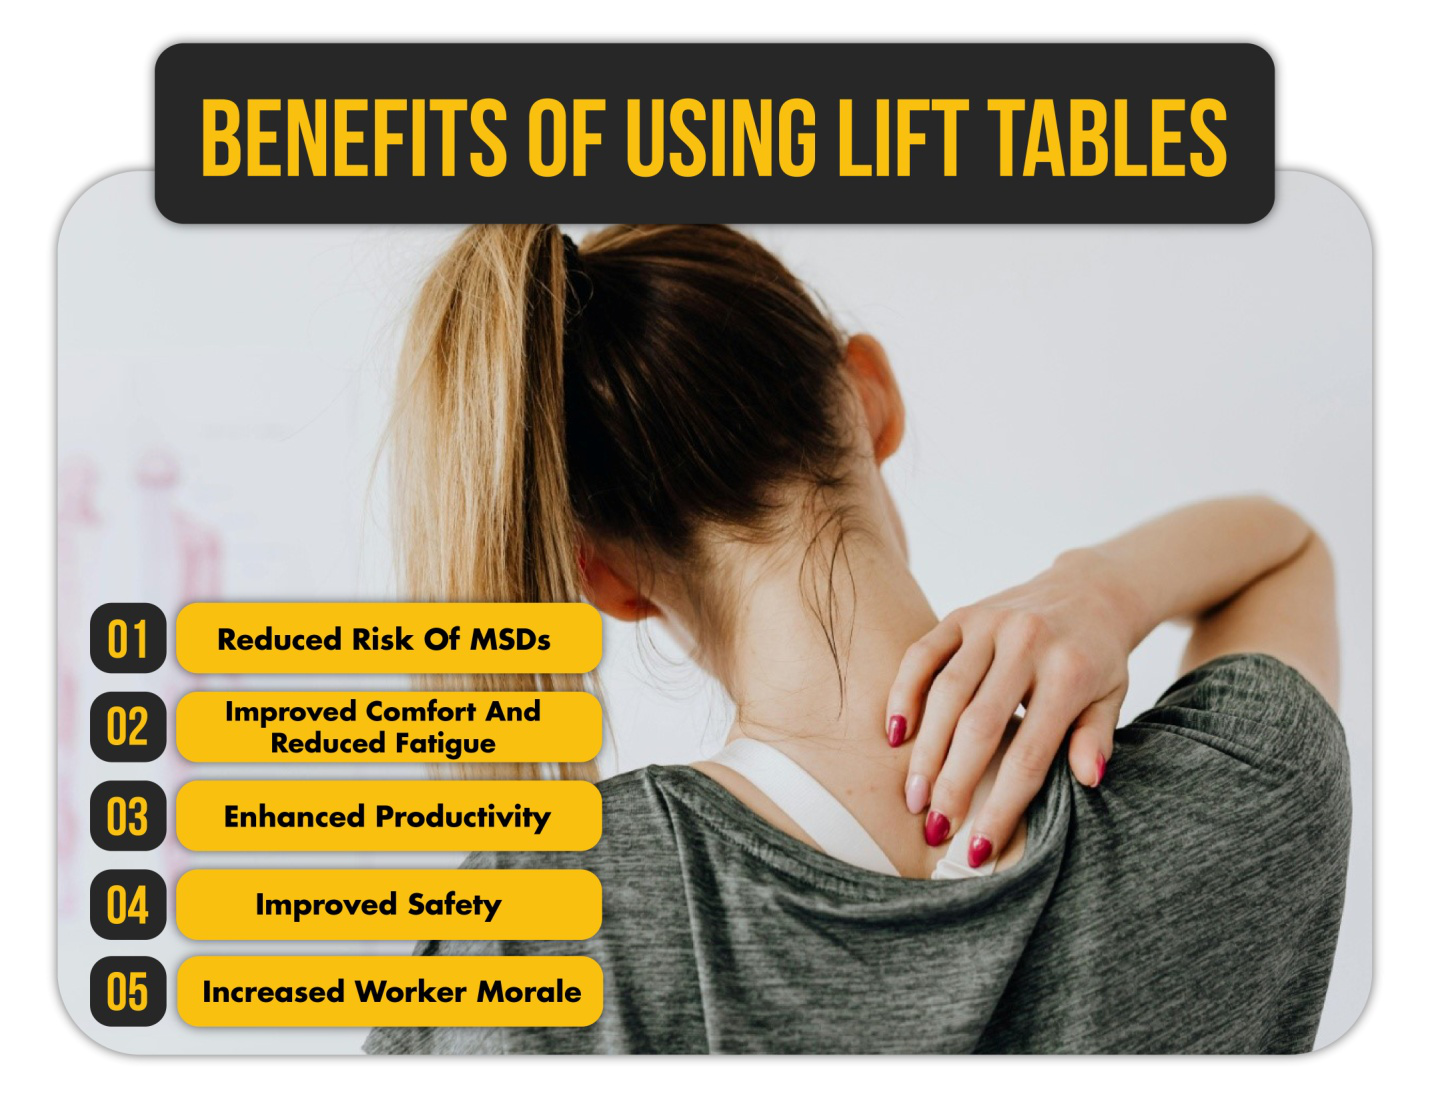 An infographic explaining the benefits of using lift tables